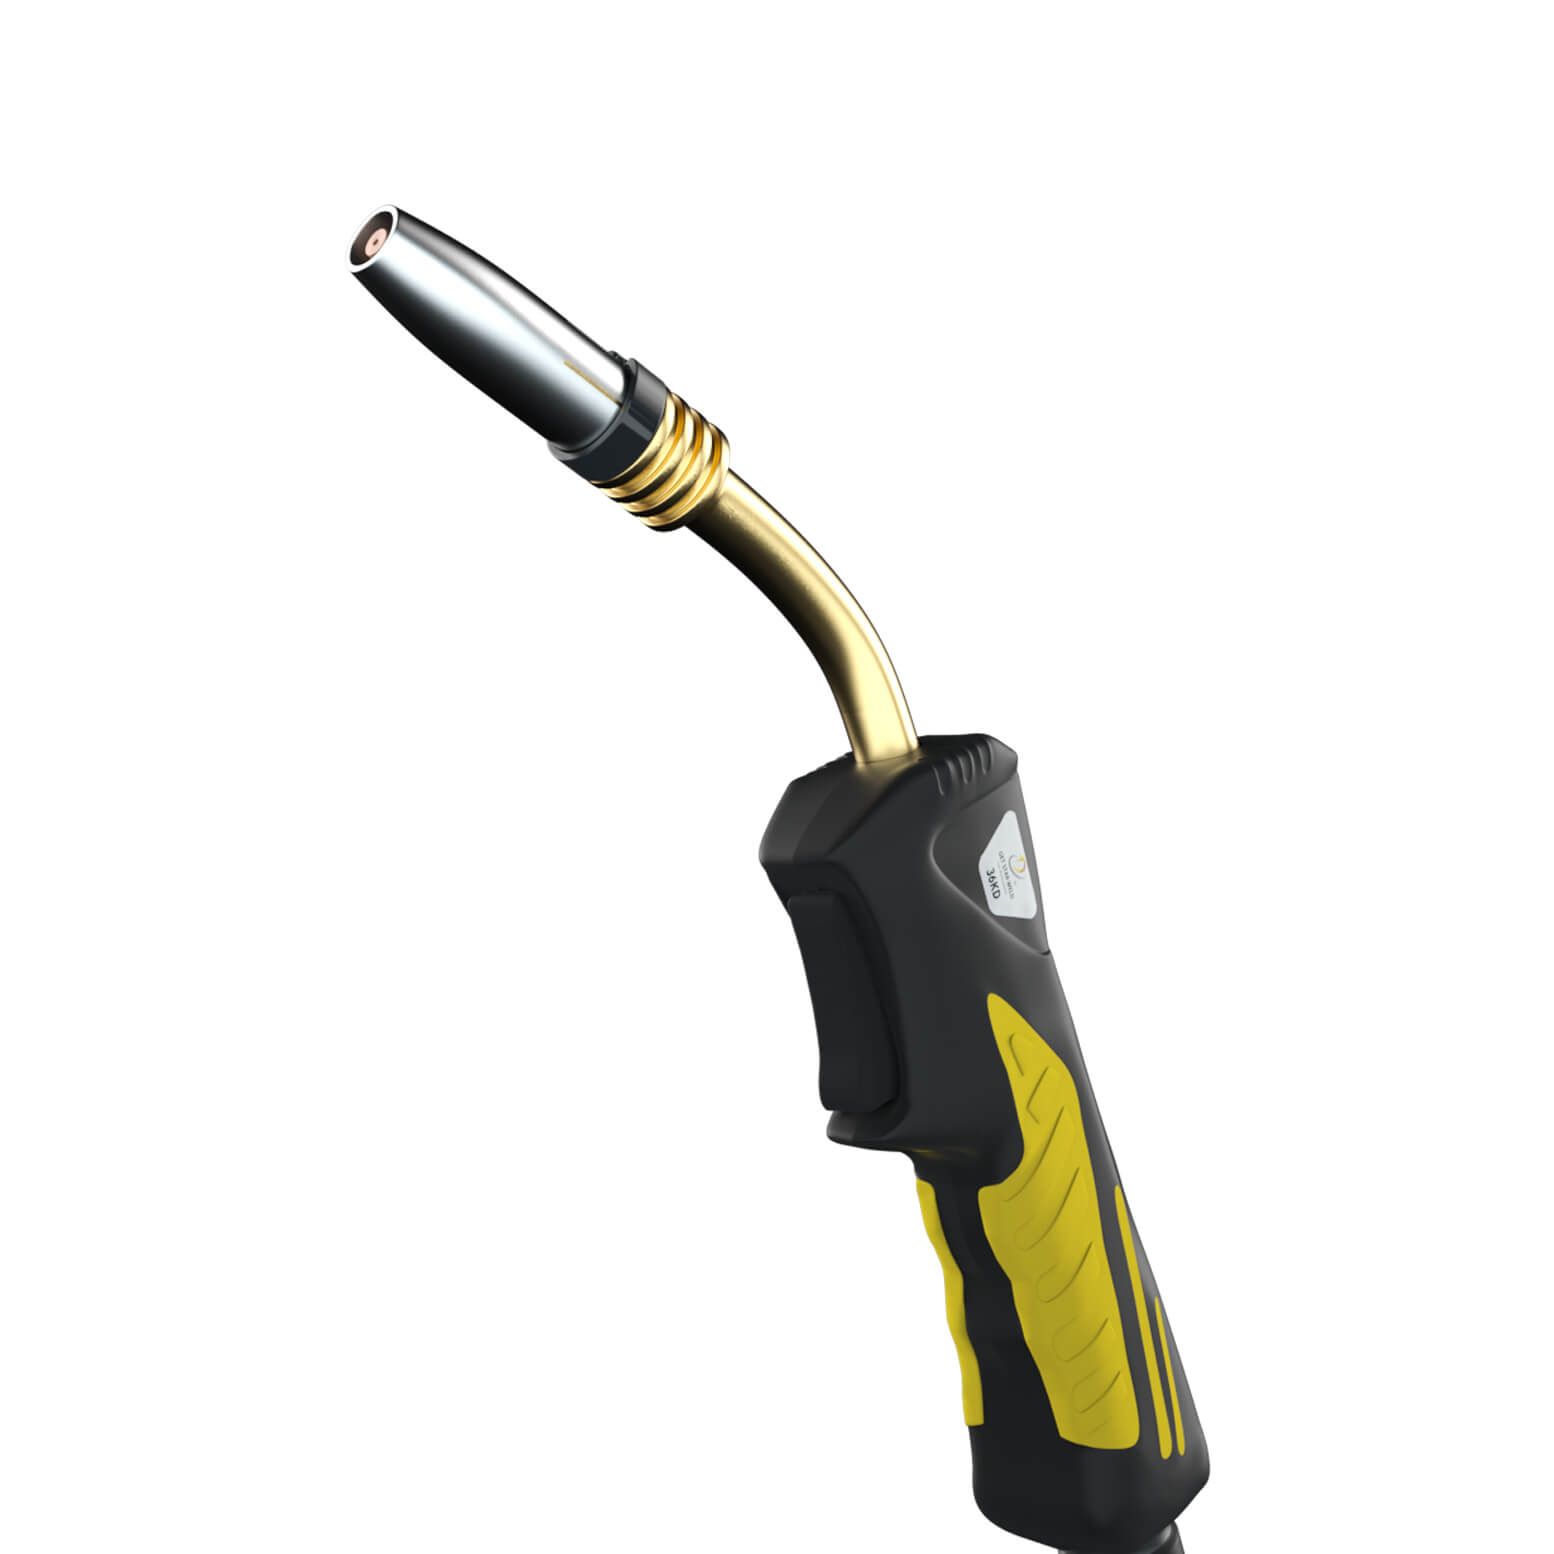 Get Star Weld EURO GSW-36KD Air Cooled MIG/MAG Welding Torch